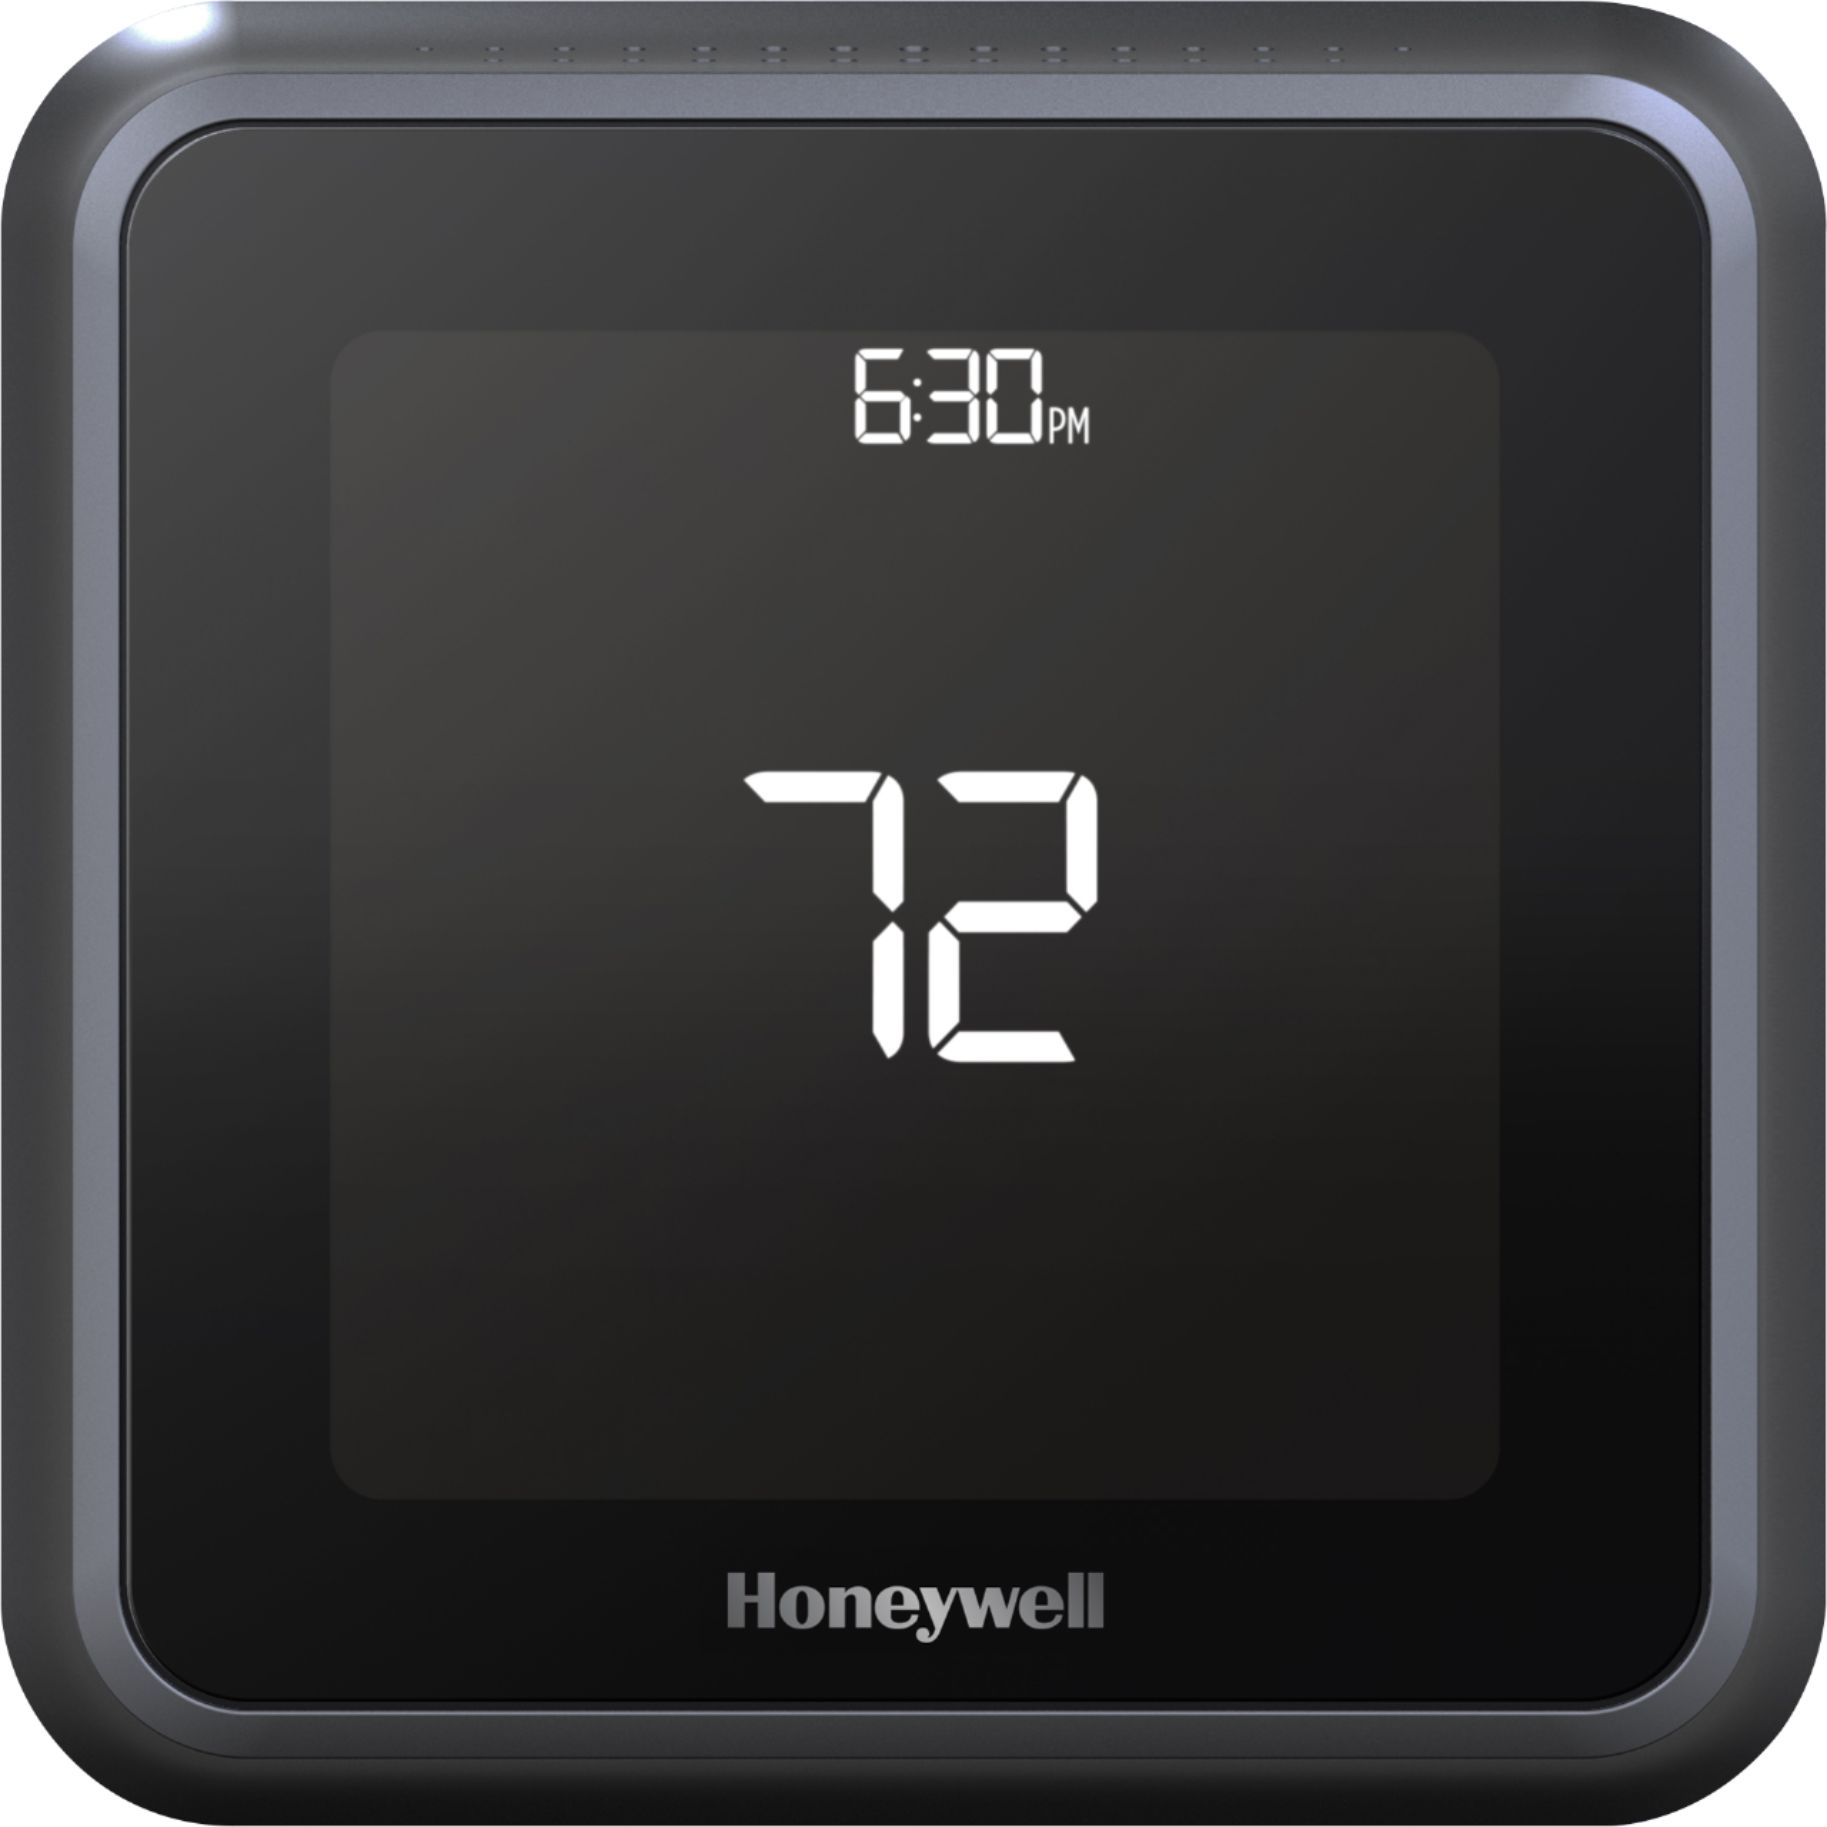 Programmable Thermostats - Best Buy